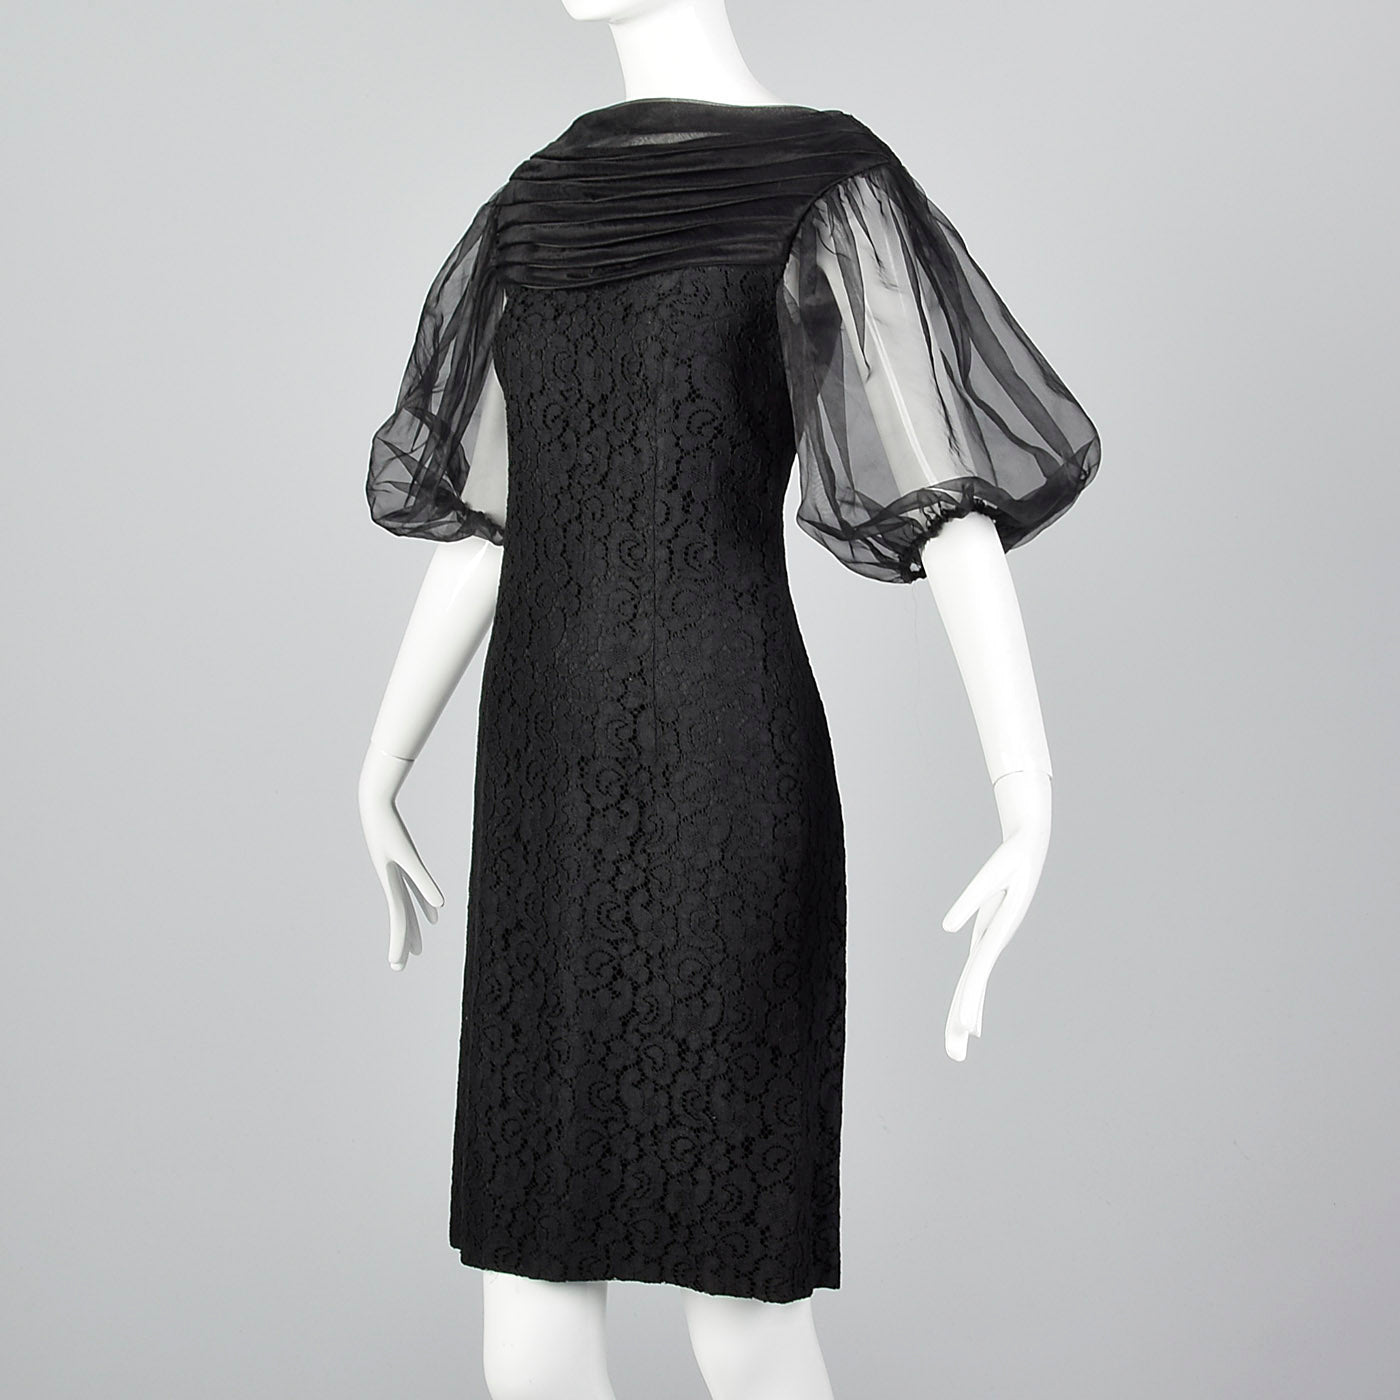 1960s Lace Overlay Shift Dress with Sheer Poof Sleeves